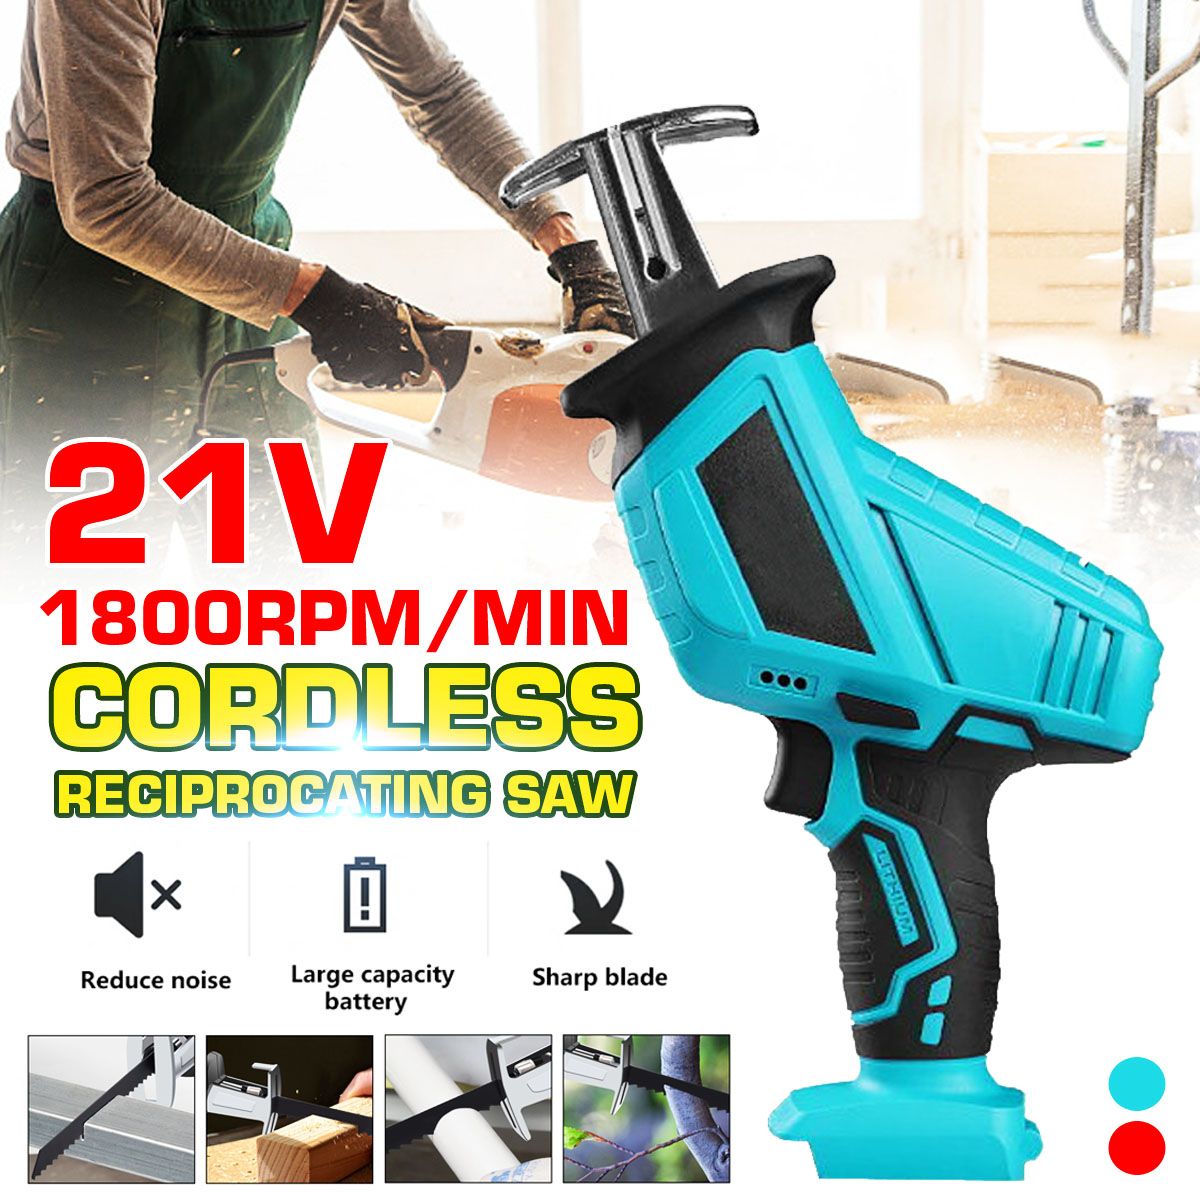 0-1800RPM-21V-Cordless-Reciprocating-Saw--Multifunctional-Electric-Saw-With-4-Blades-1715363